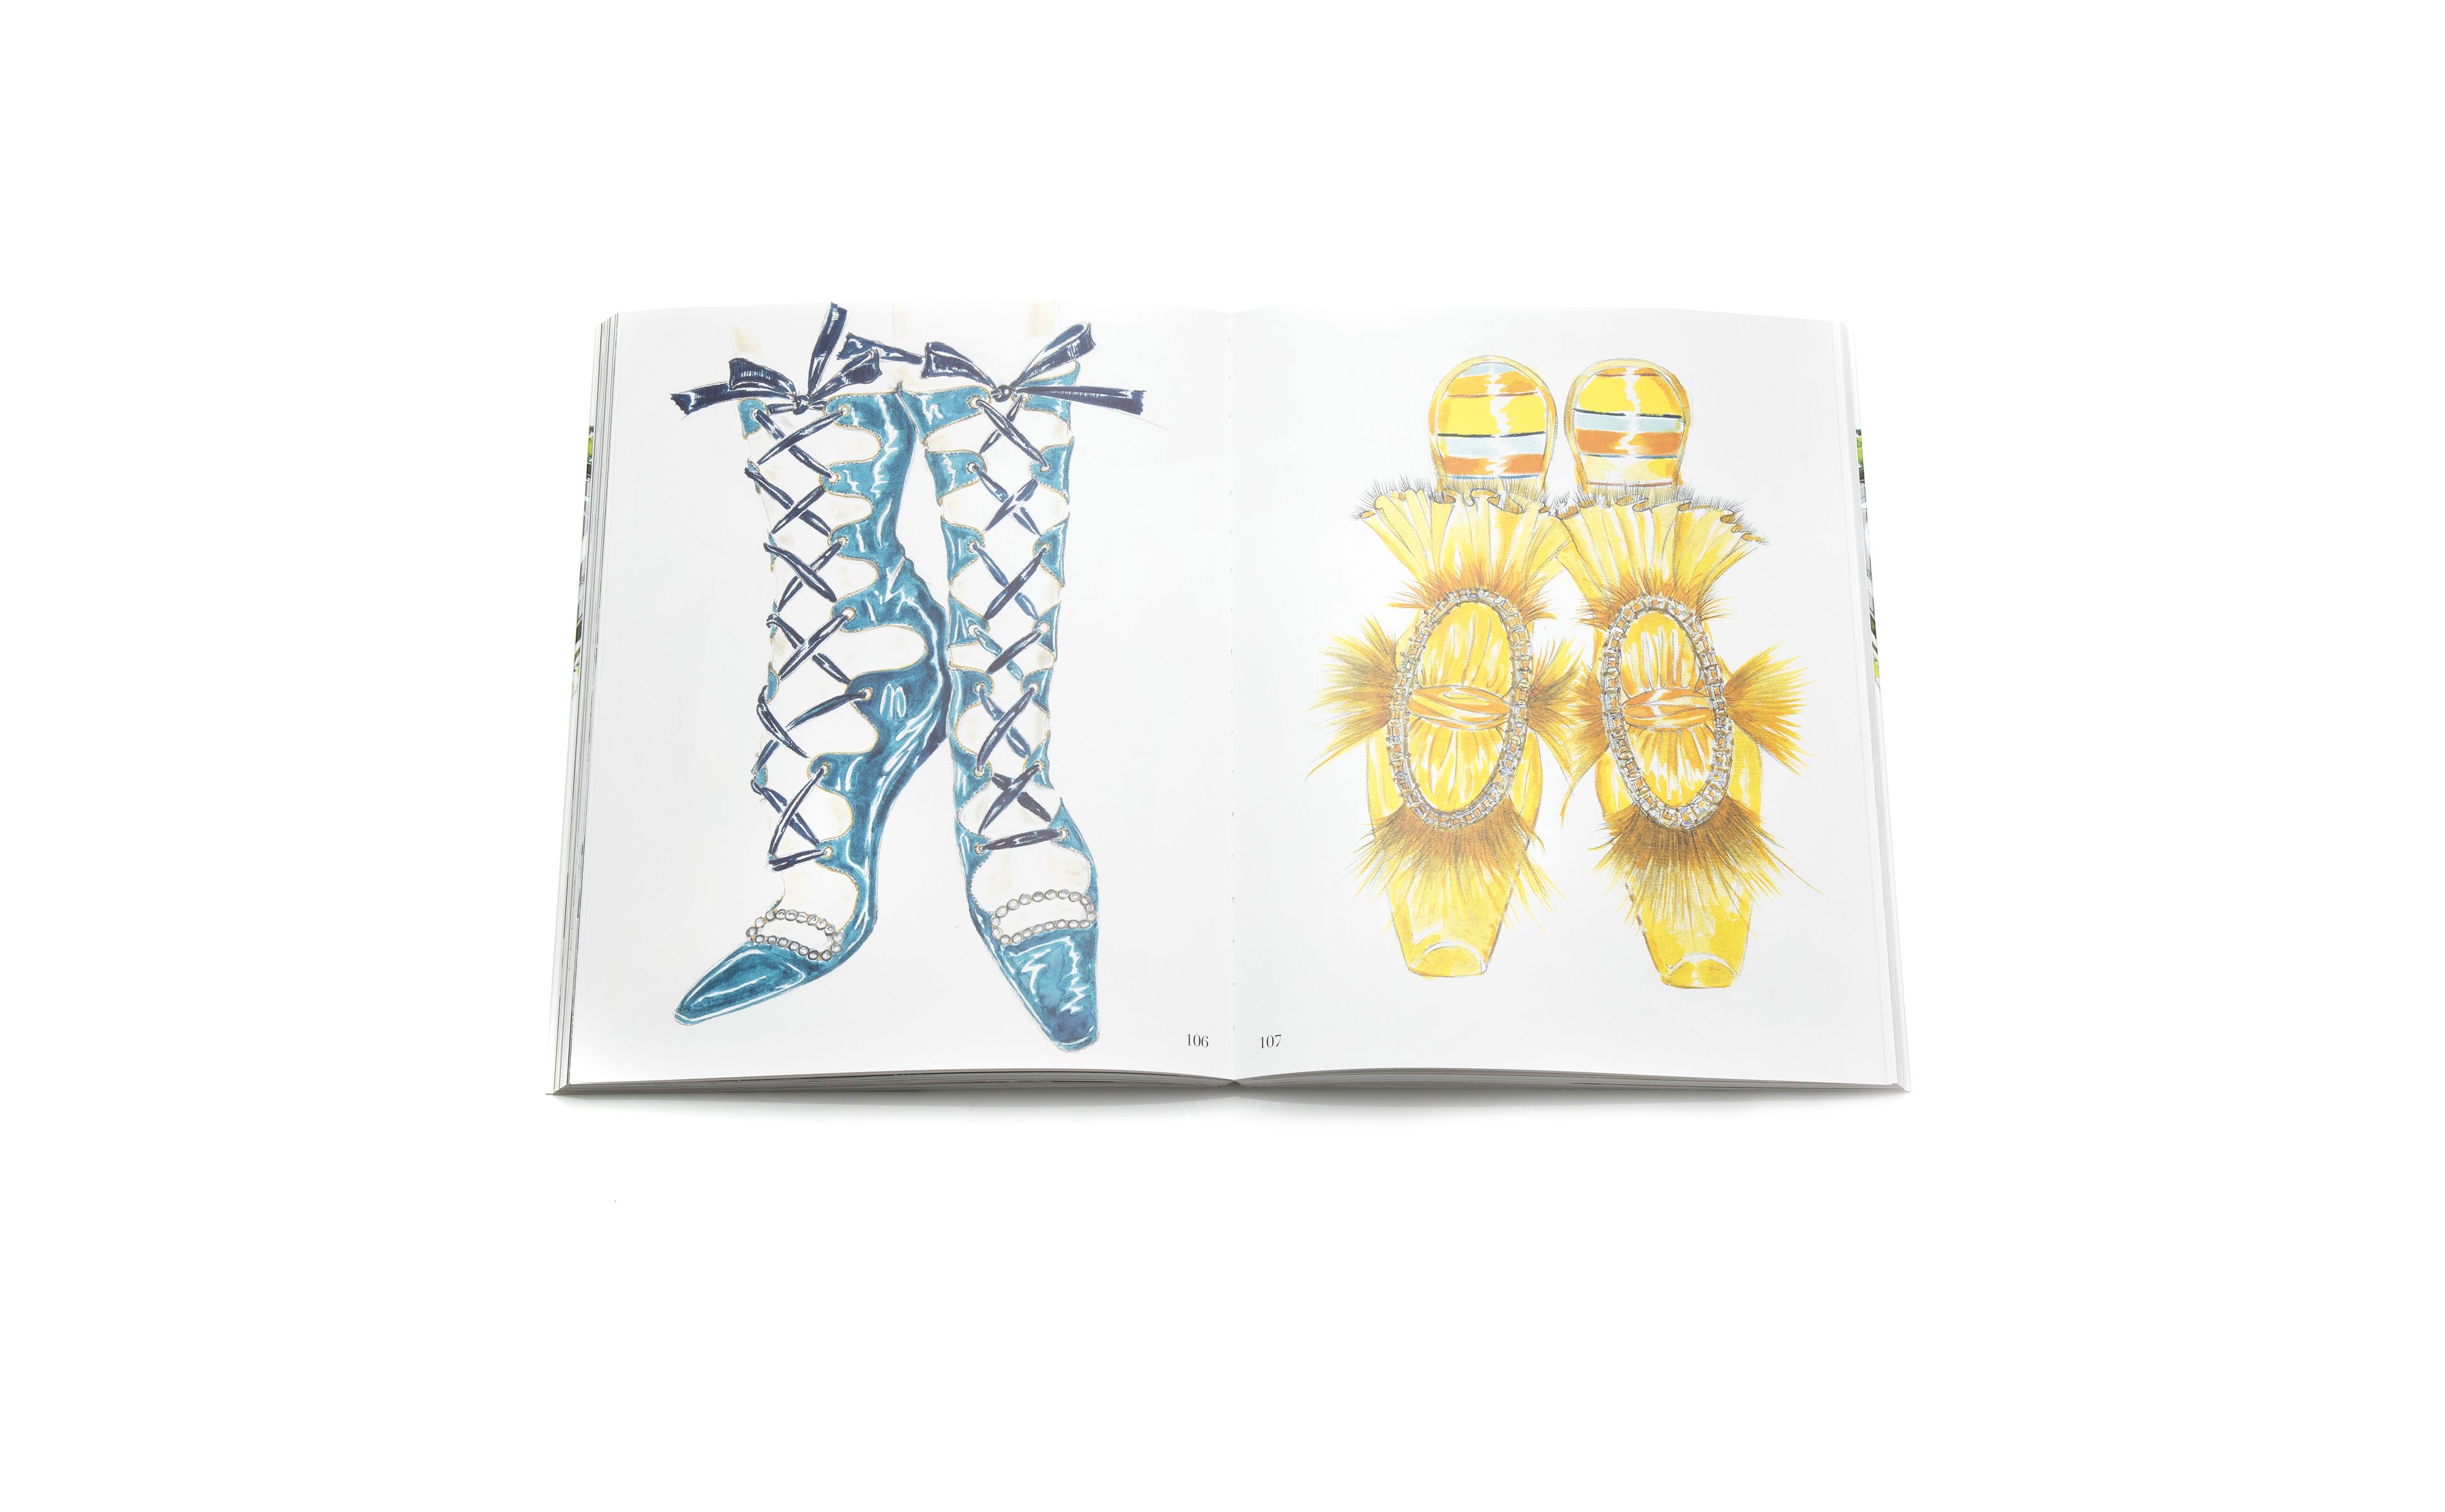 Designer Manolo's New Shoes - Drawings by Manolo Blahnik - Image 